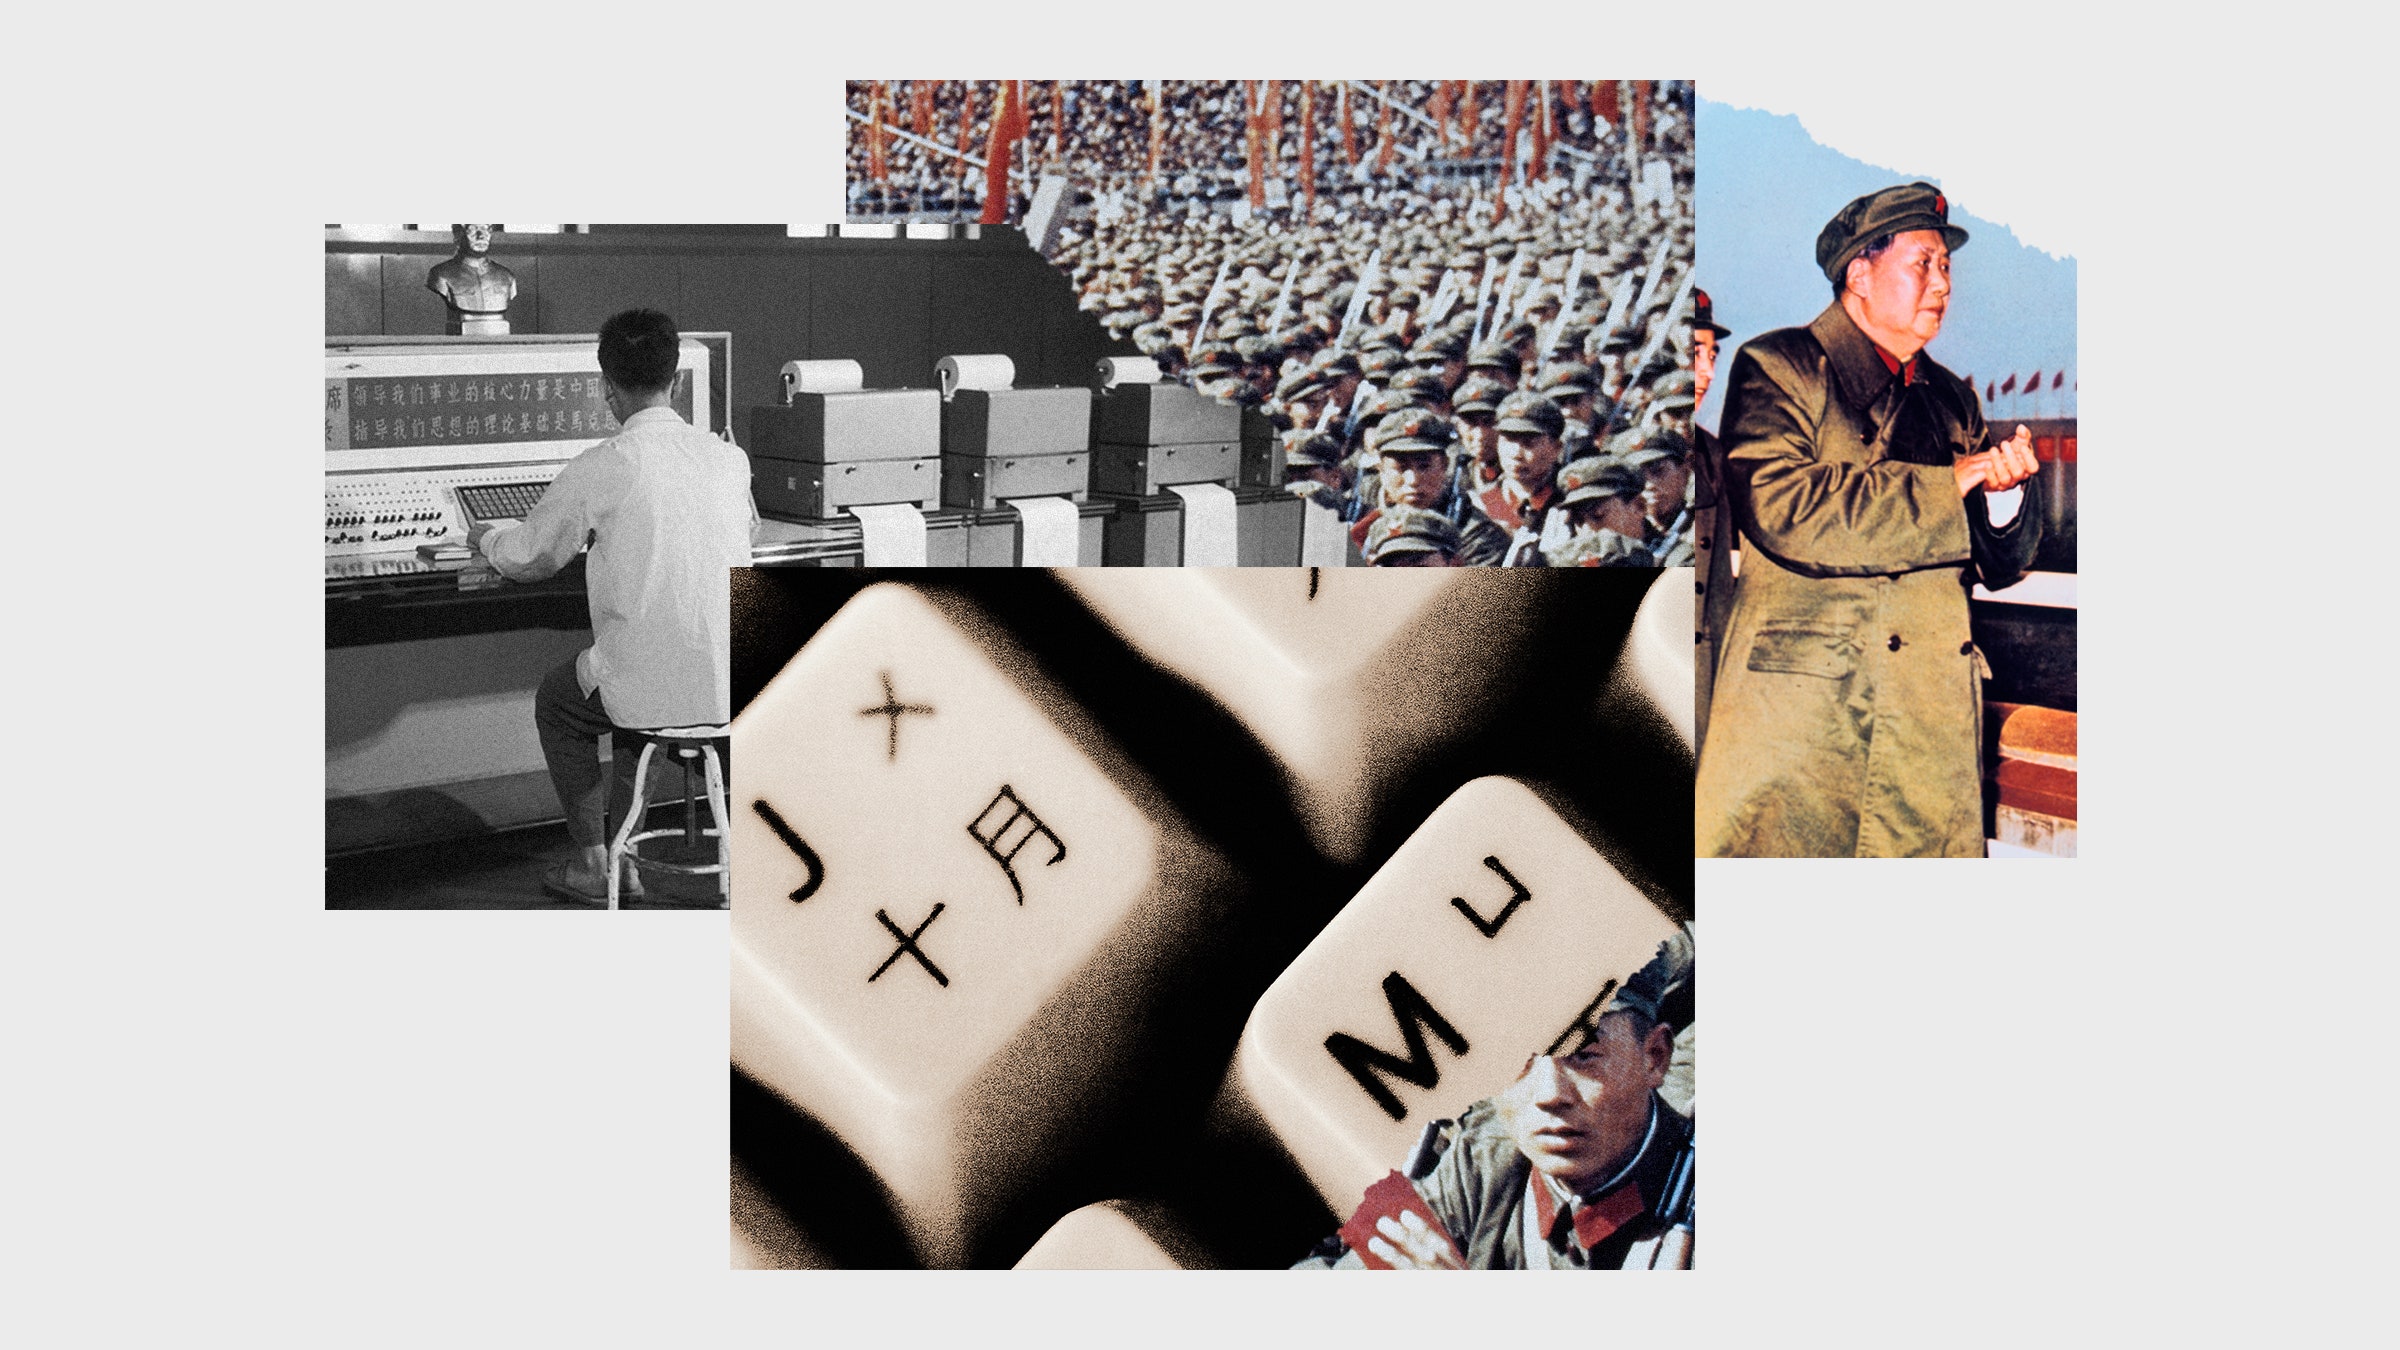 collage of images of mandarin keyboard Mao communist rally and computer